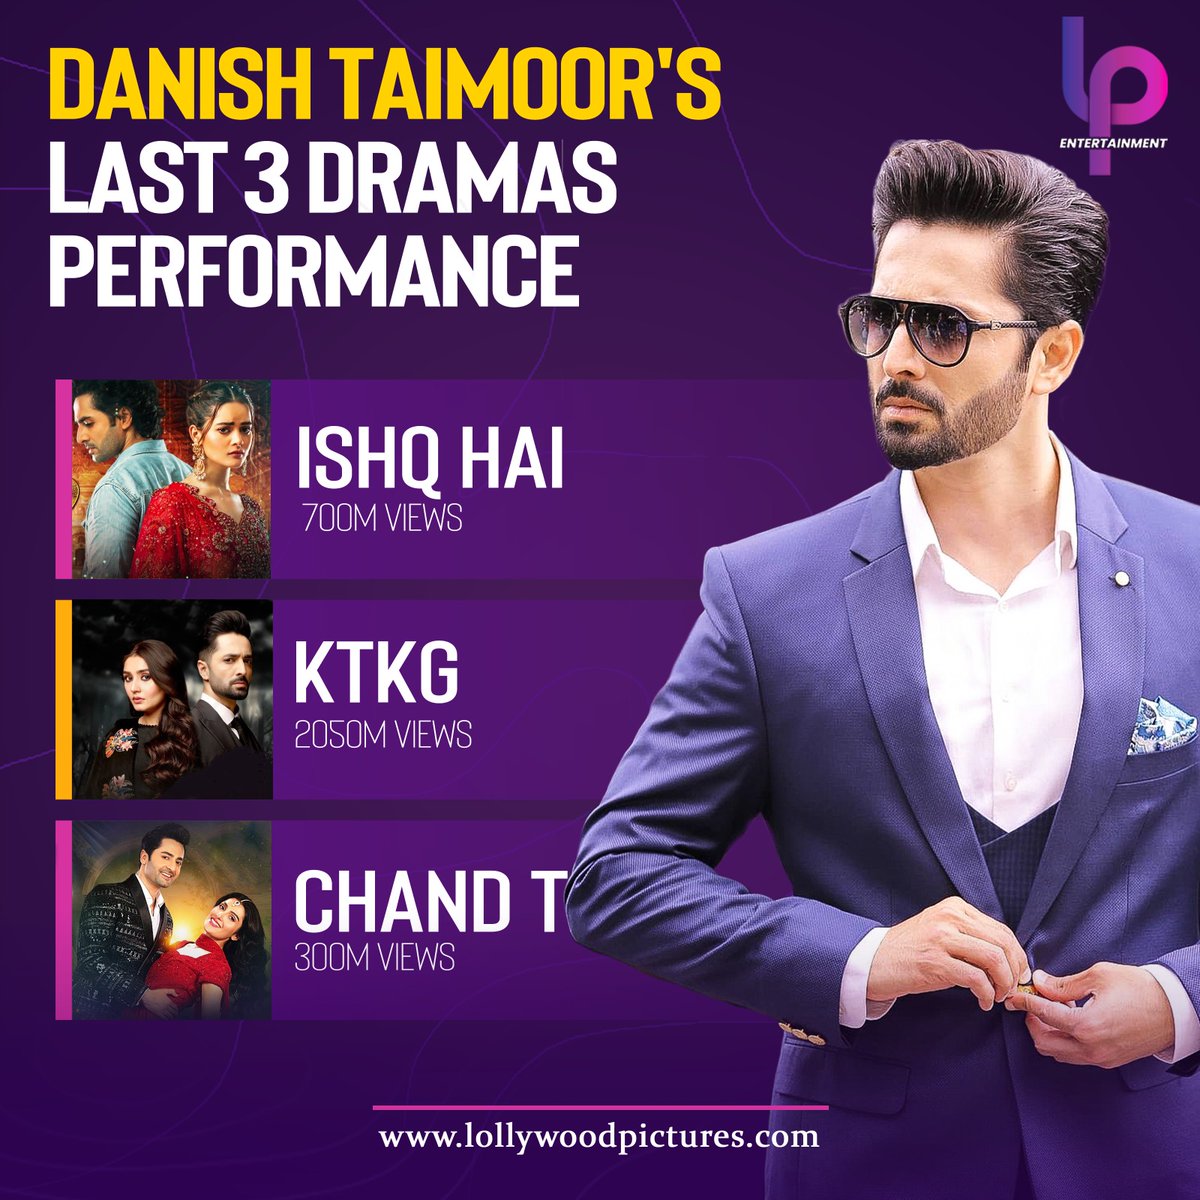 The Dynamic and charismatic Danish Taimoor has given so many blockbusters throughout his Career. 🤩🔥 Let's take a look at his last 3 drama's performance. #DanishTaimoor #BlockbusterDramas #PakistaniDramas #LPEntertainment #Celebrities